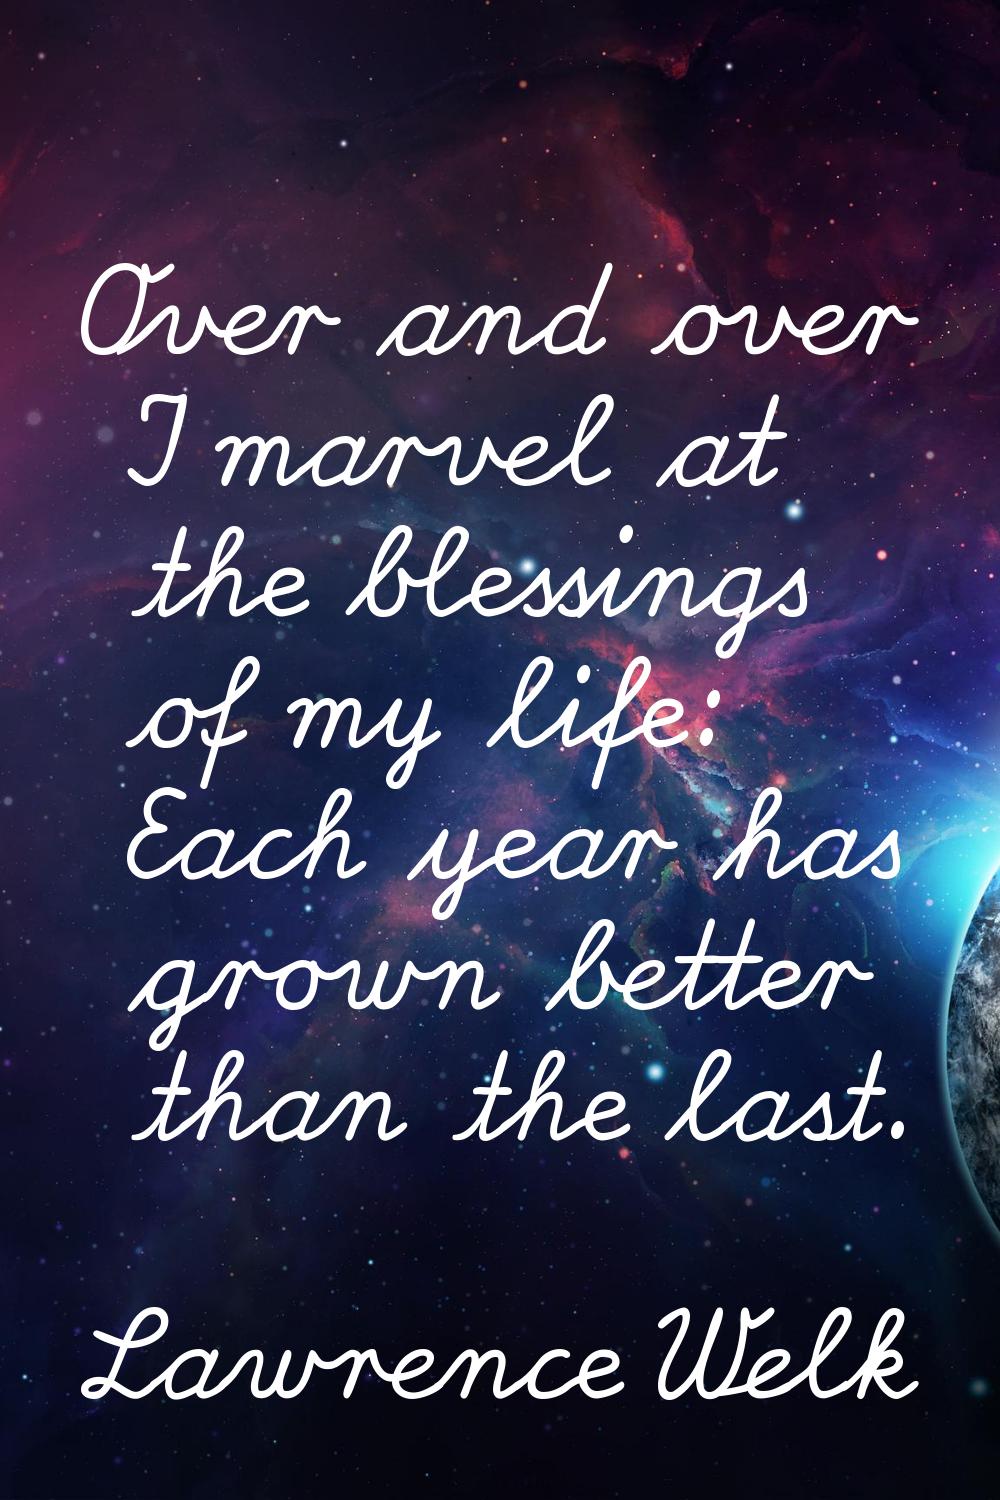 Over and over I marvel at the blessings of my life: Each year has grown better than the last.